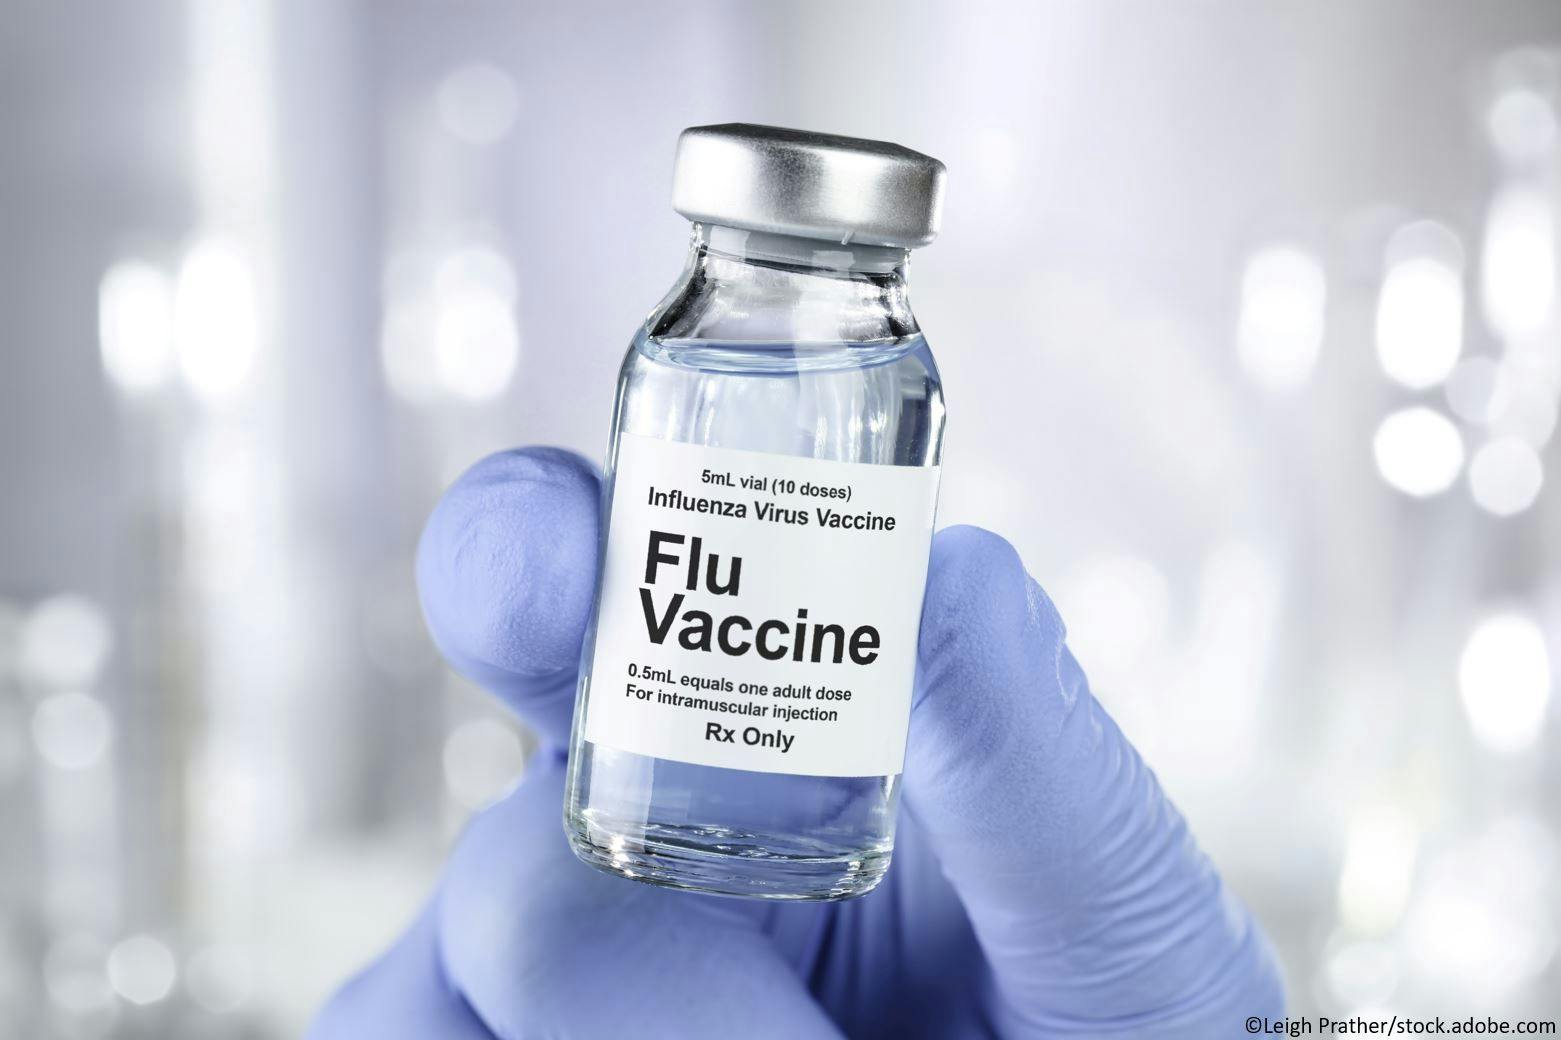 ESC 2021: Flu Vaccine Cuts Risk of Death, Heart Attack in Patients with Heart Disease